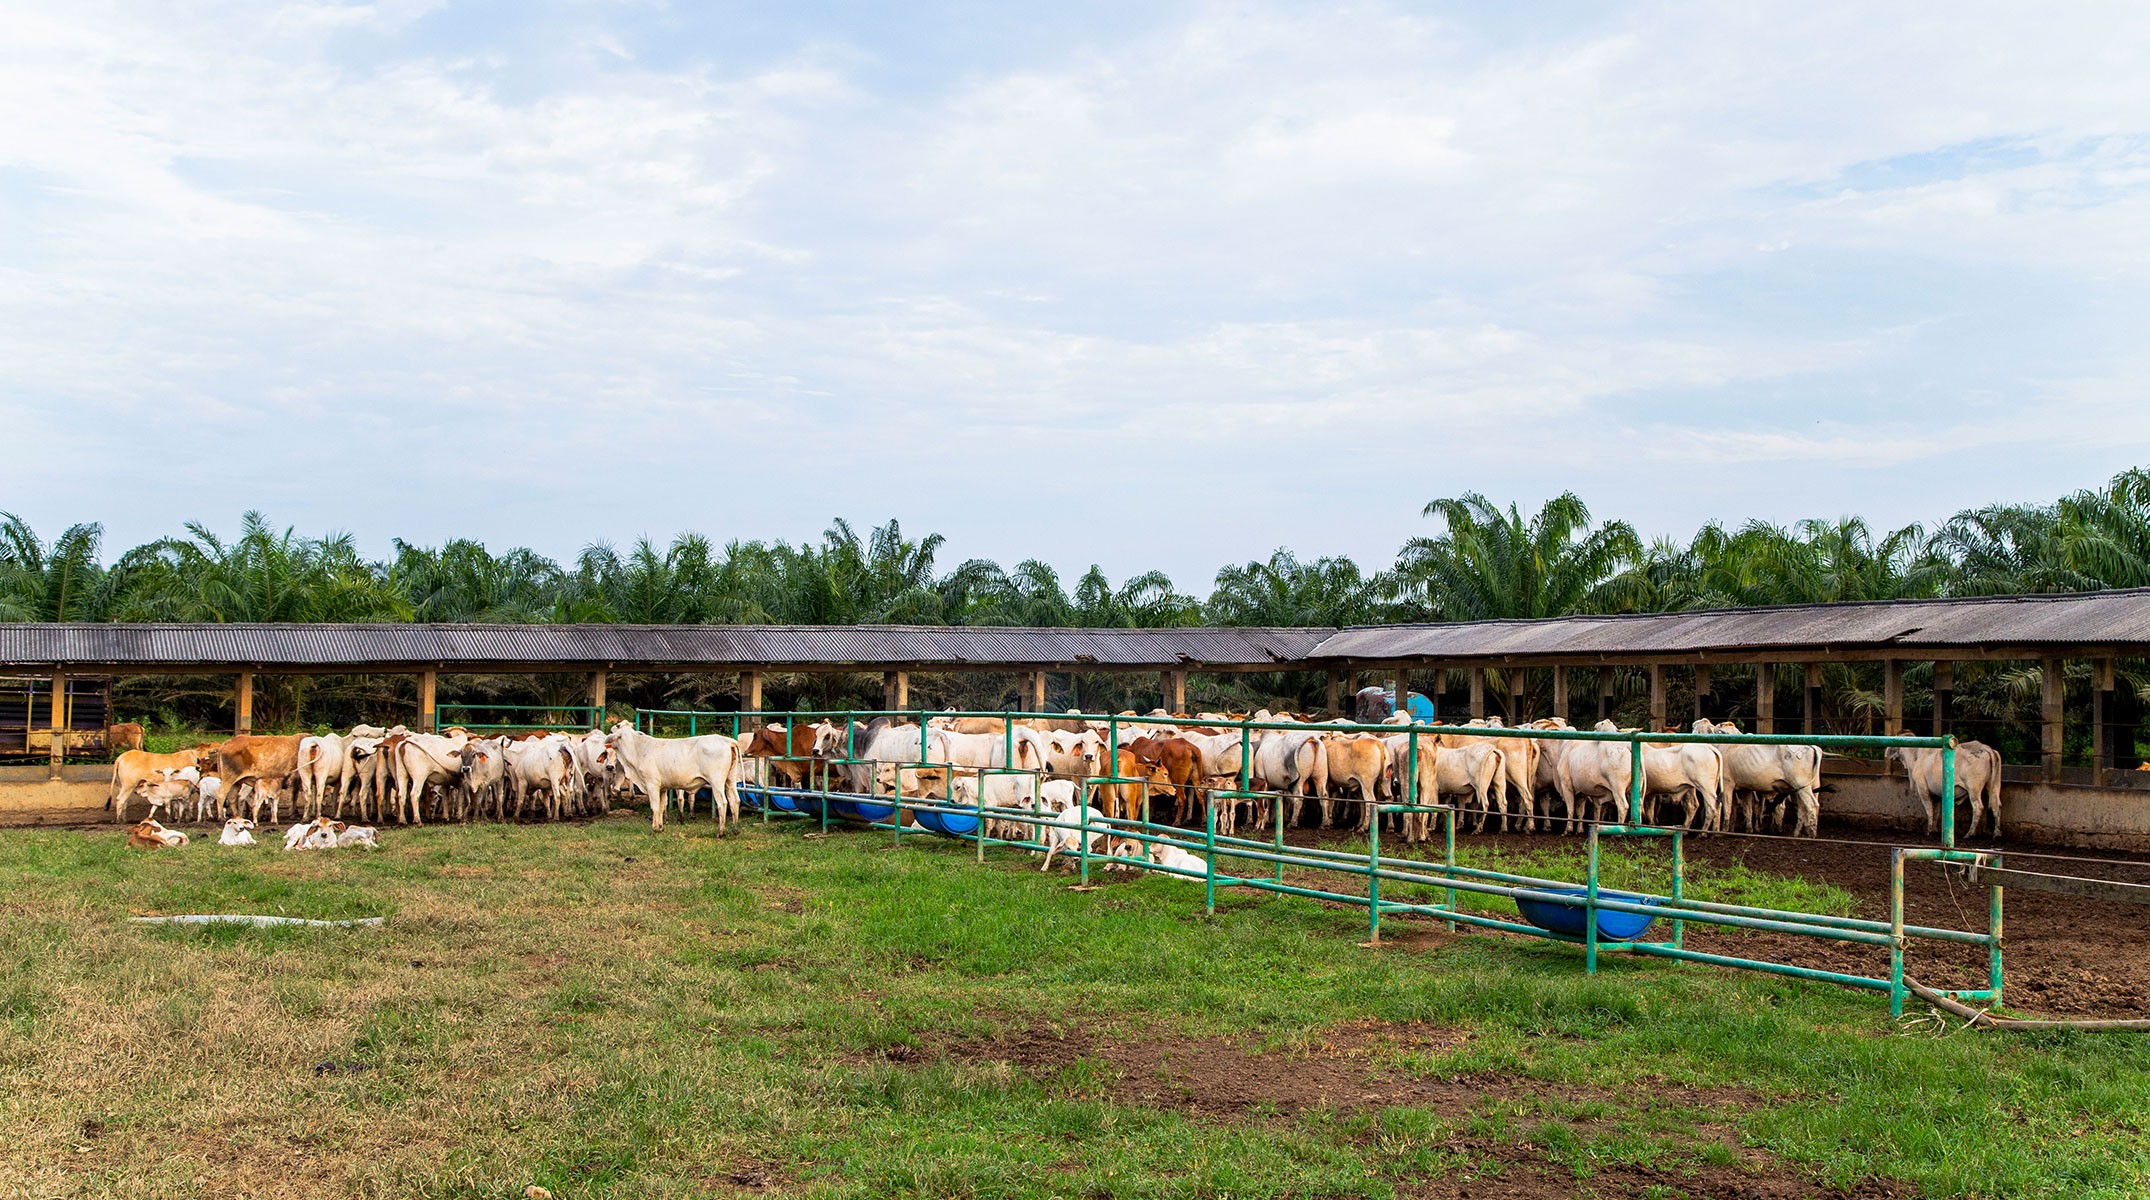 Cattle at PT KAL's facility in Central Kalimantan